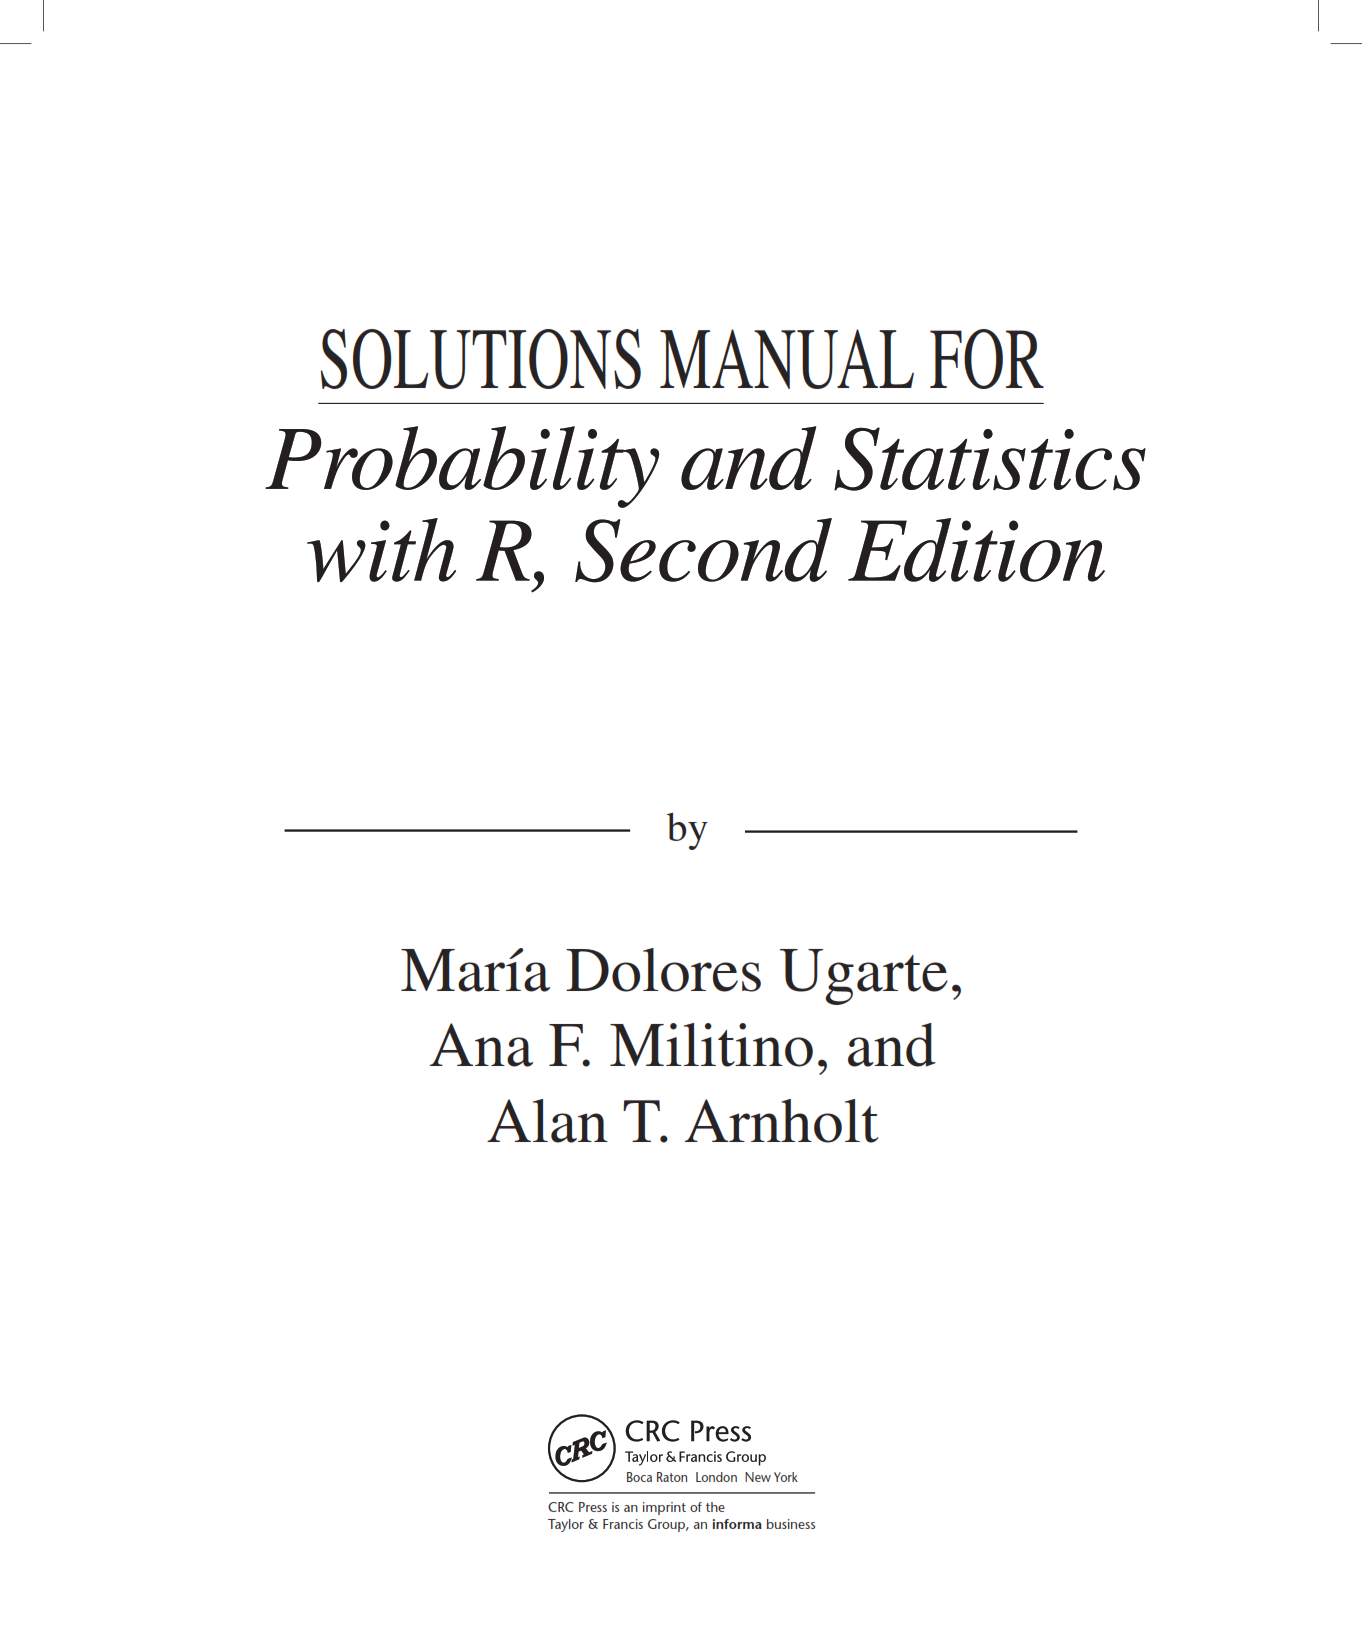 download free probability and statistics with R Maria Dolores Ugarte , Militino , Arnholt  2nd edition solutions manual pdf | Gioumeh solution